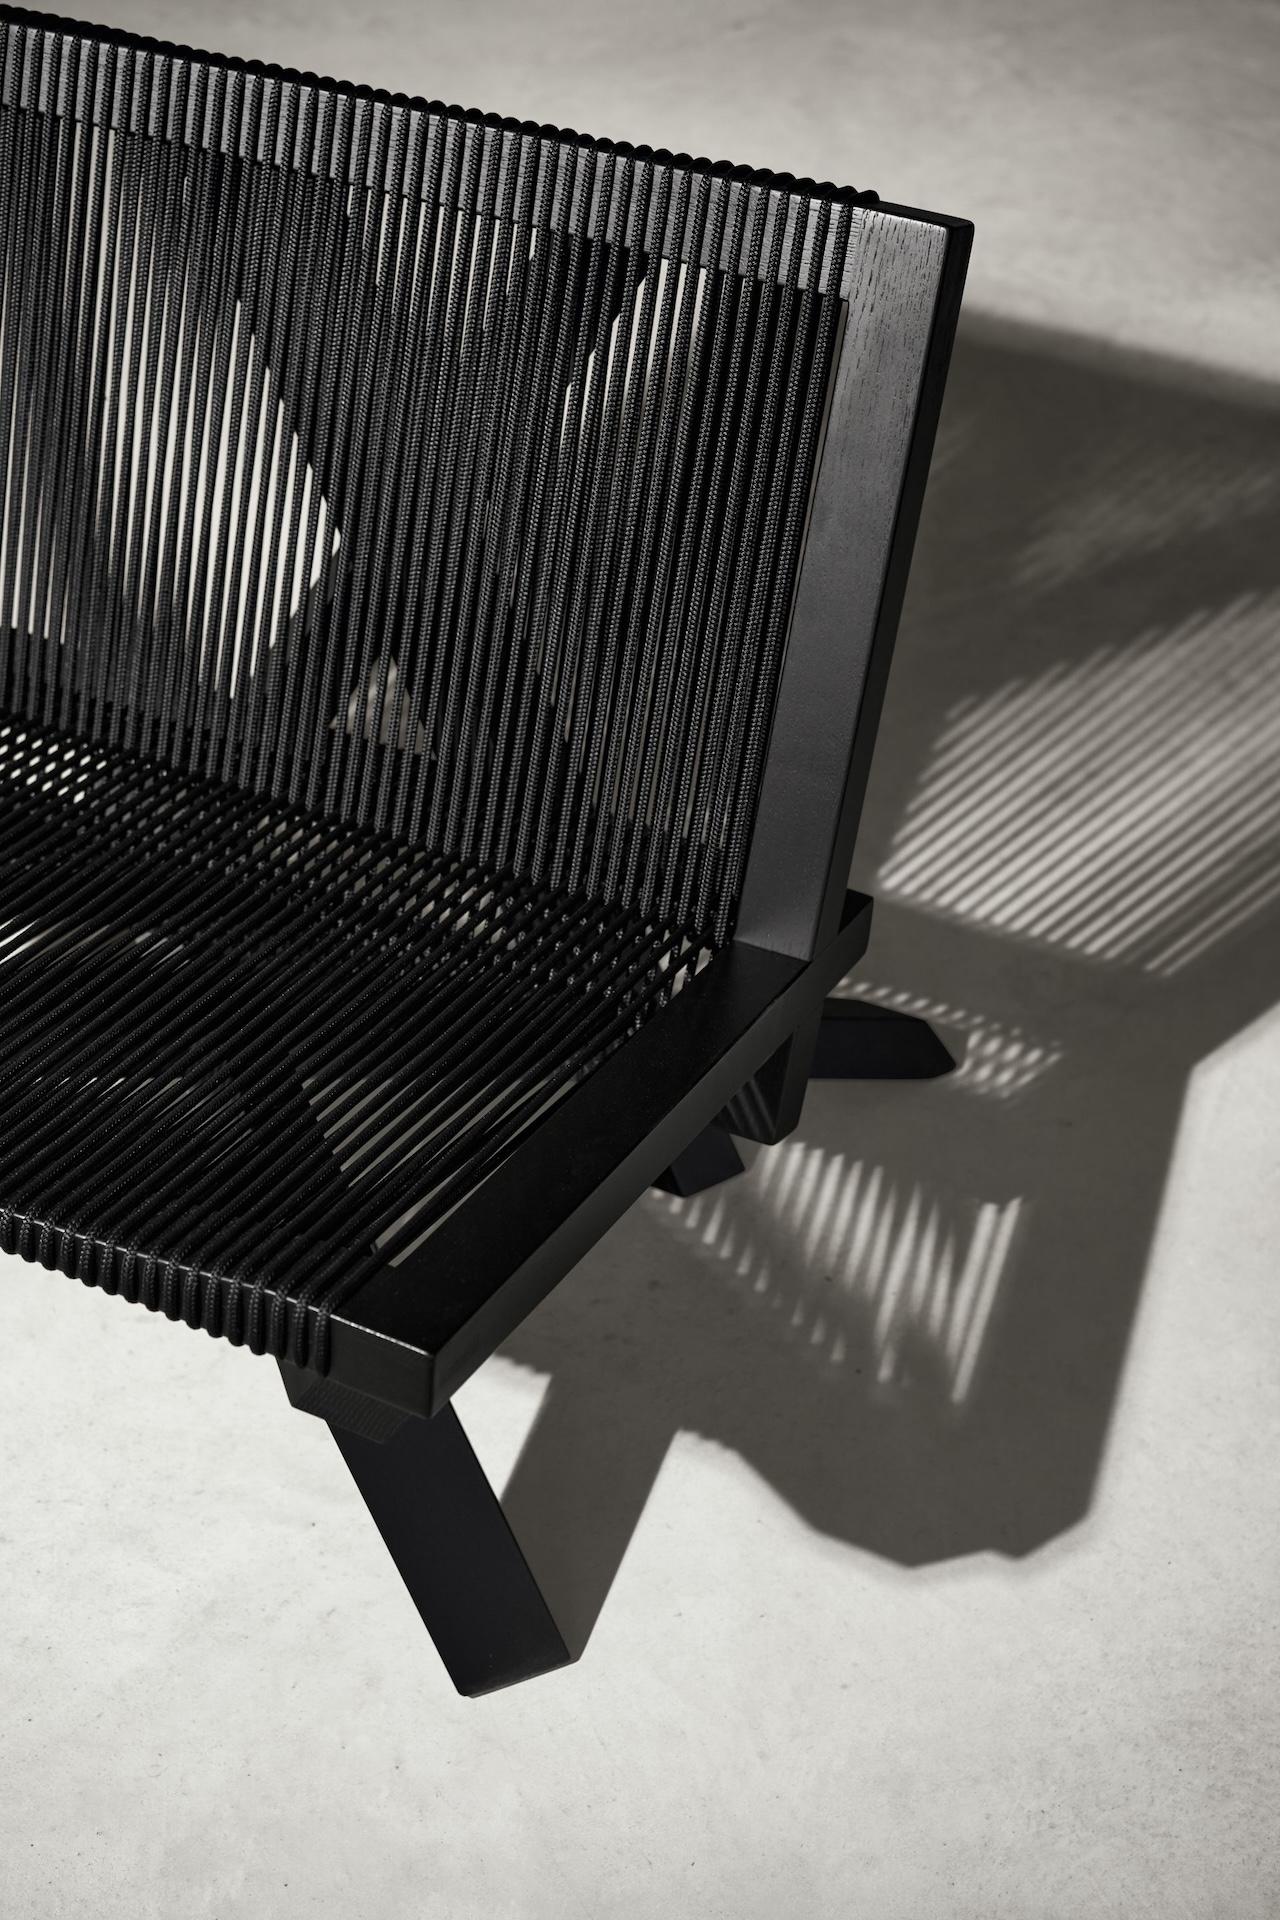 Volkshaus Lounge Chair by Herzog & de Meuron In New Condition For Sale In New York, NY